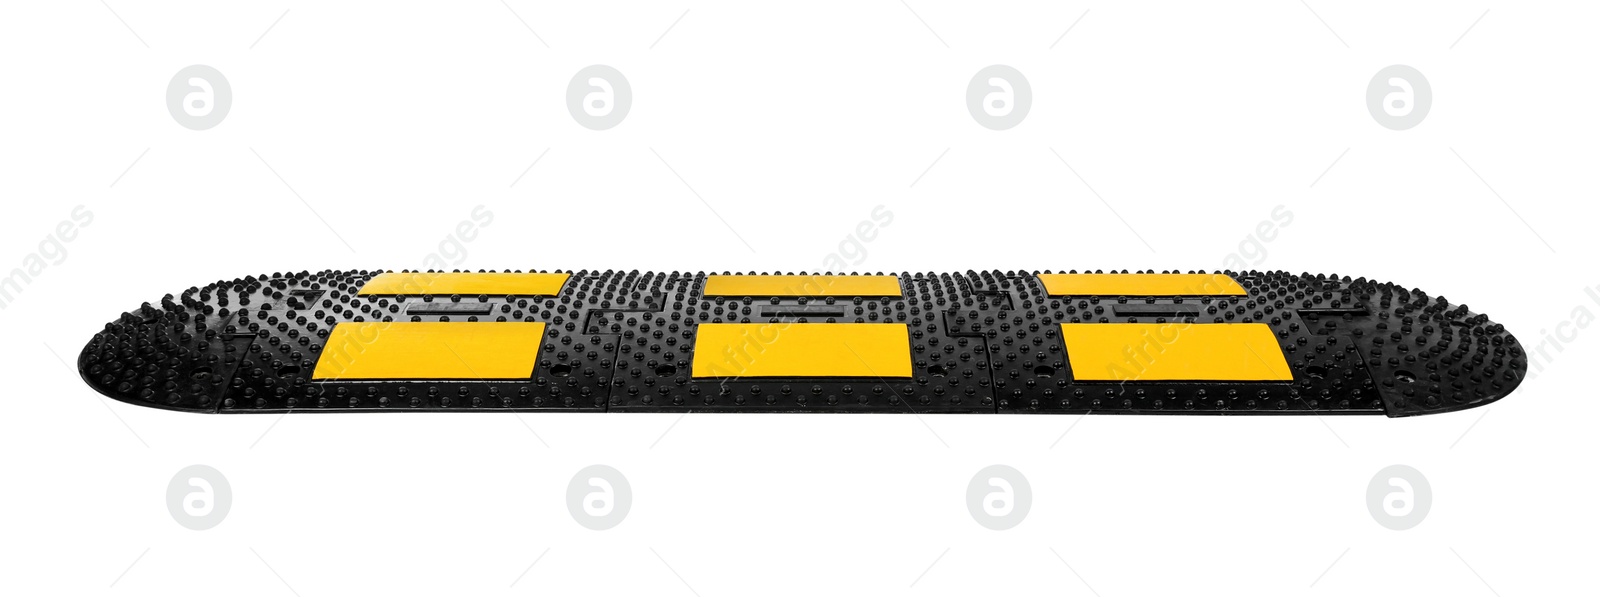 Photo of Speed bump isolated on white. Traffic calming device